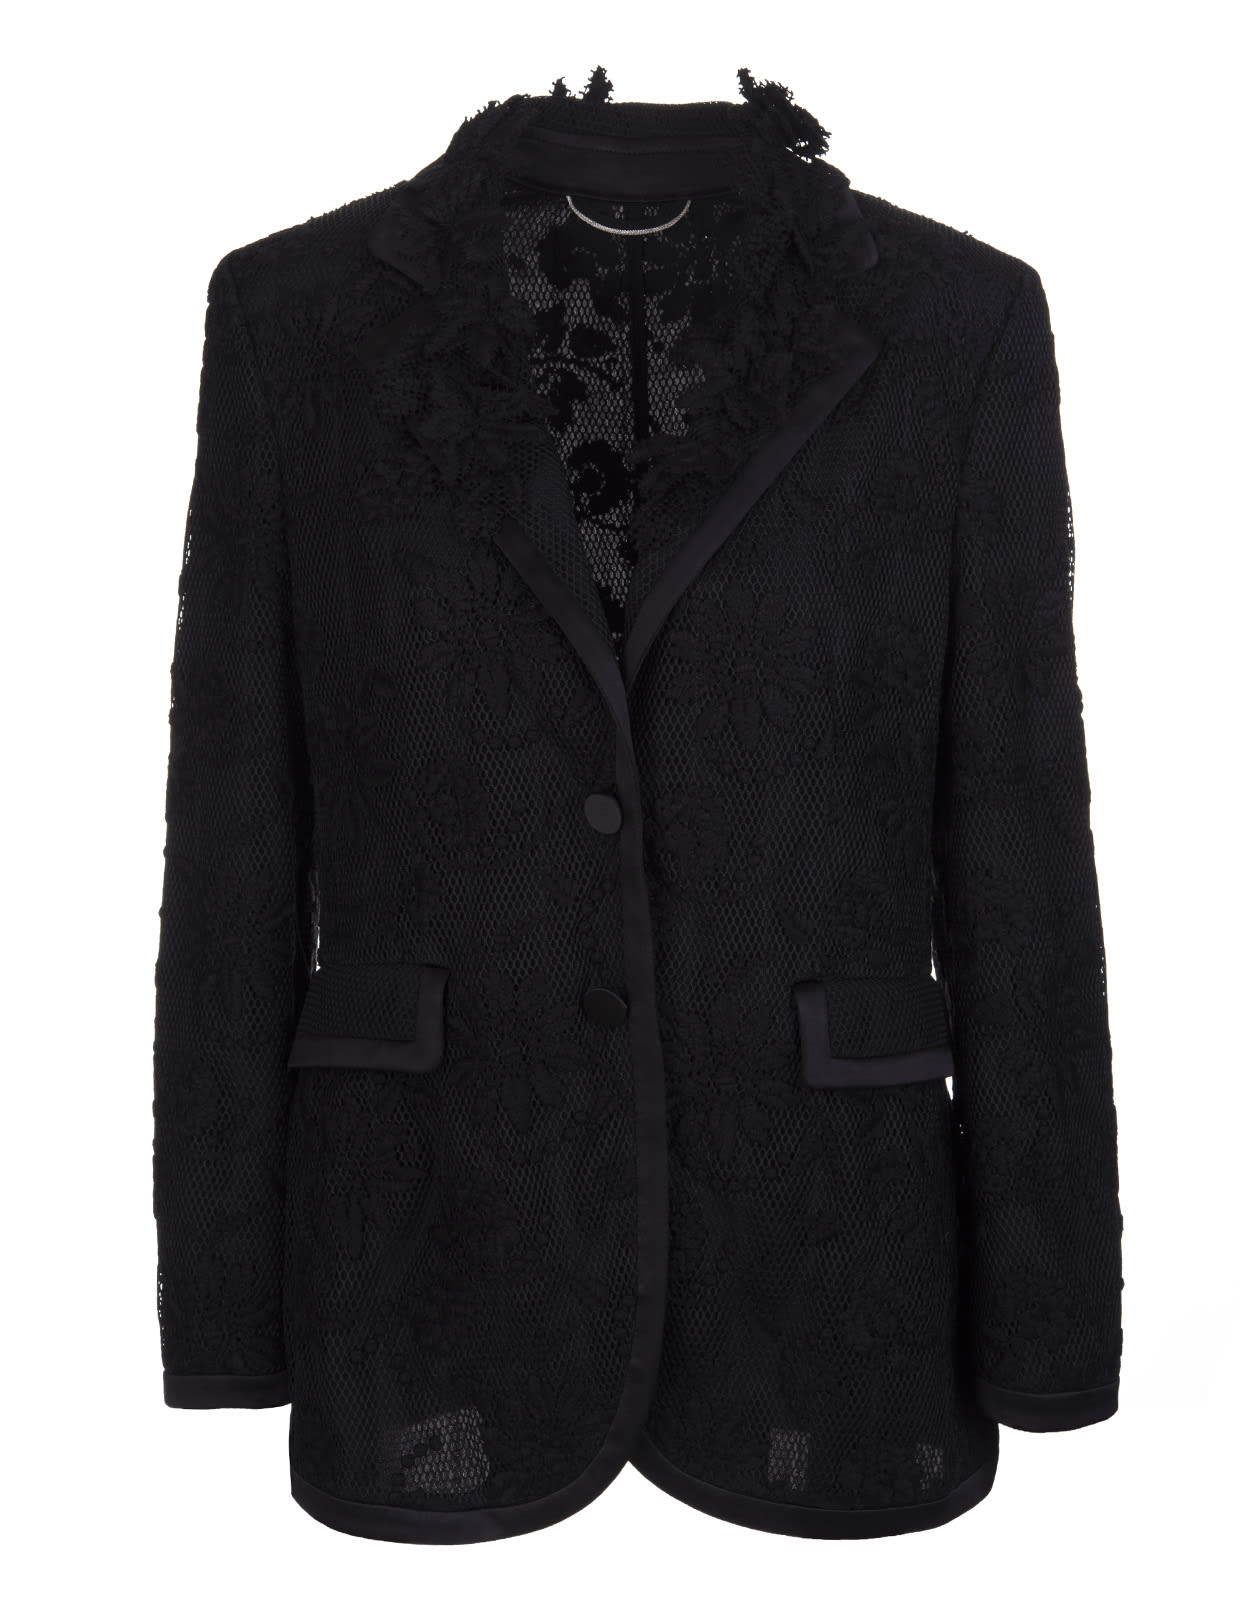 Ermanno Scervino Black Jacket With Mesh Layer And Floral Embroidery